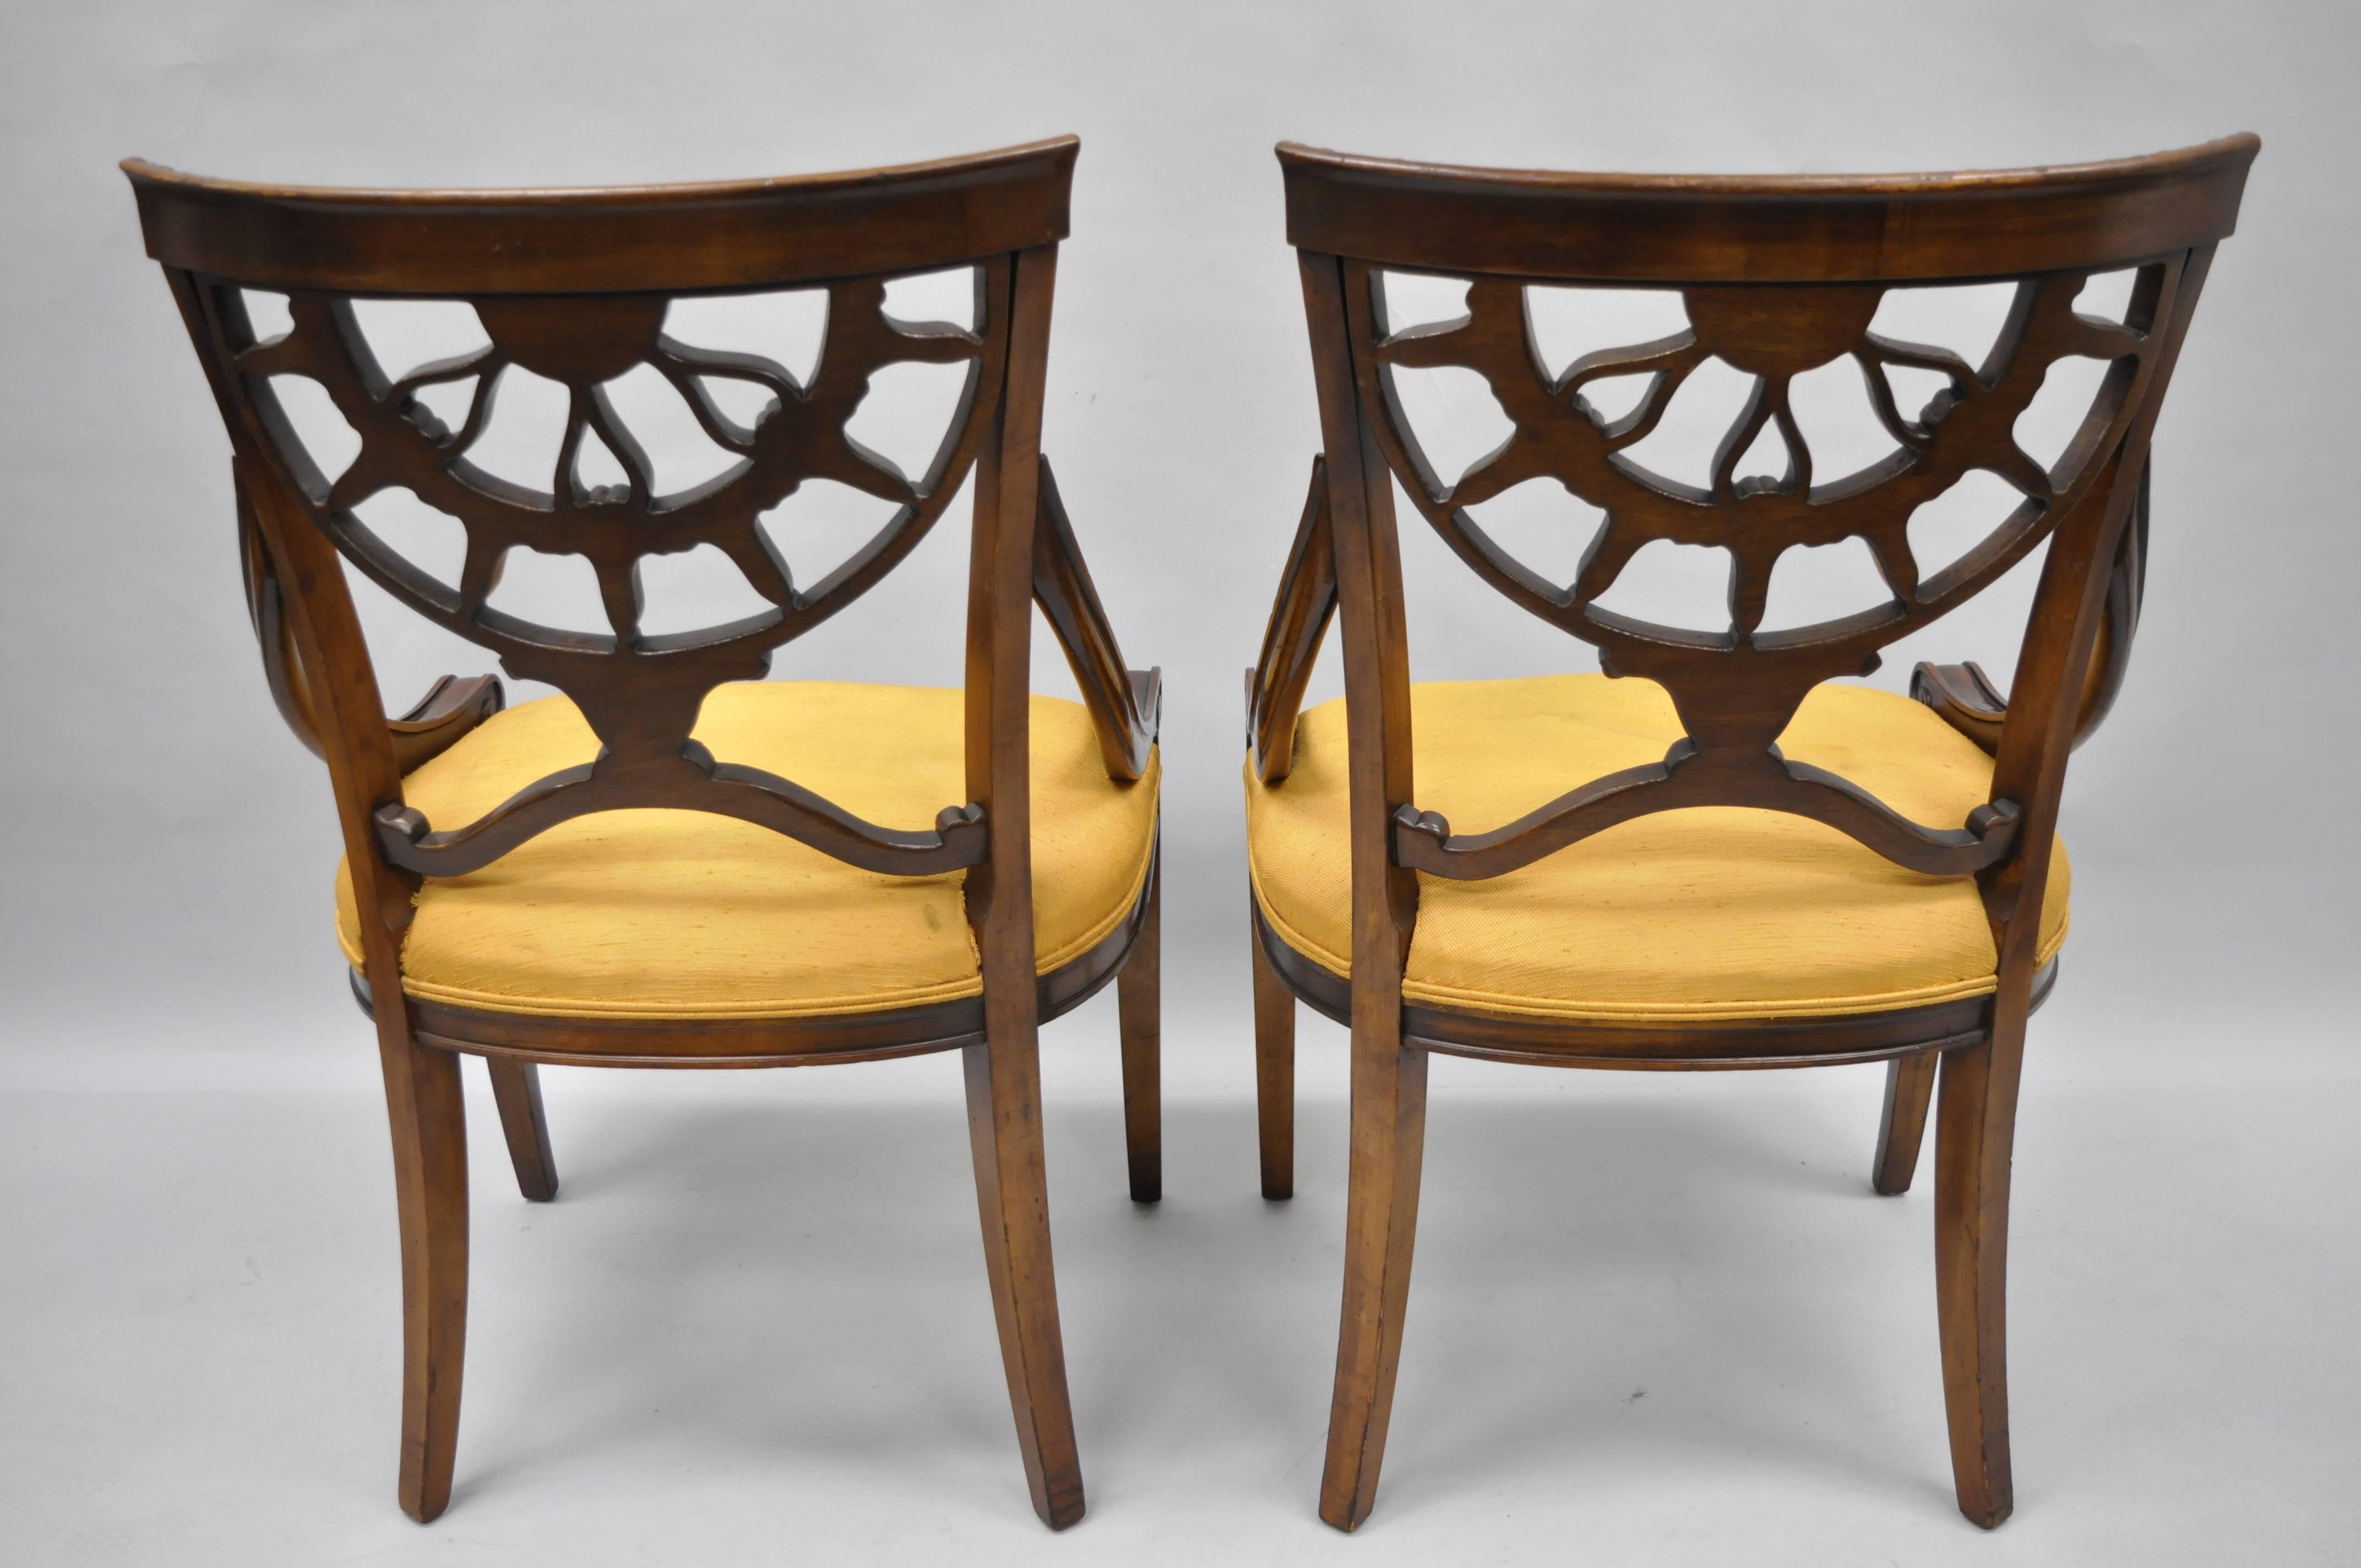 Pair of Antique French Regency Style Pierce Carved Mahogany Dining Room Chairs 2